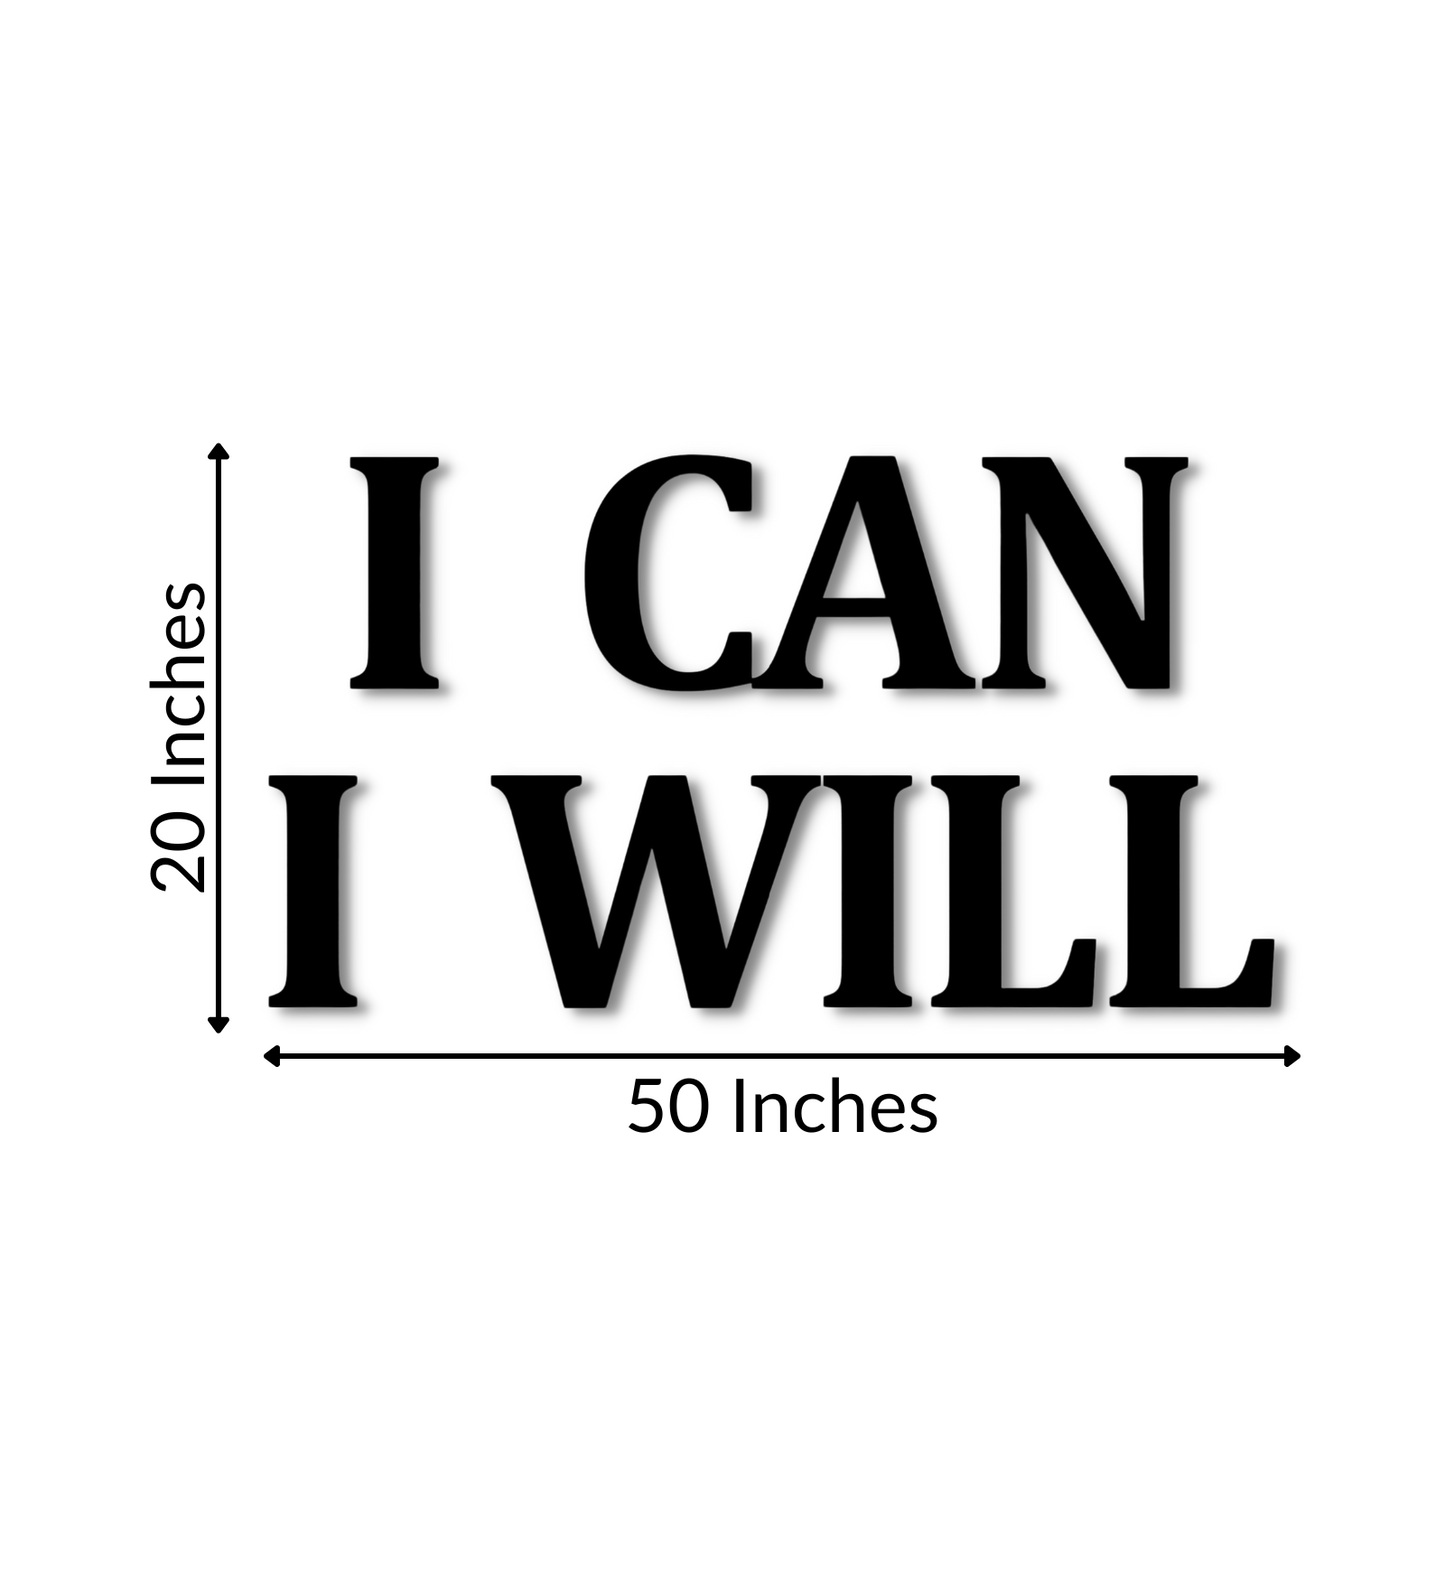 I CAN I WILL Motivational Quote 3D Wooden Art